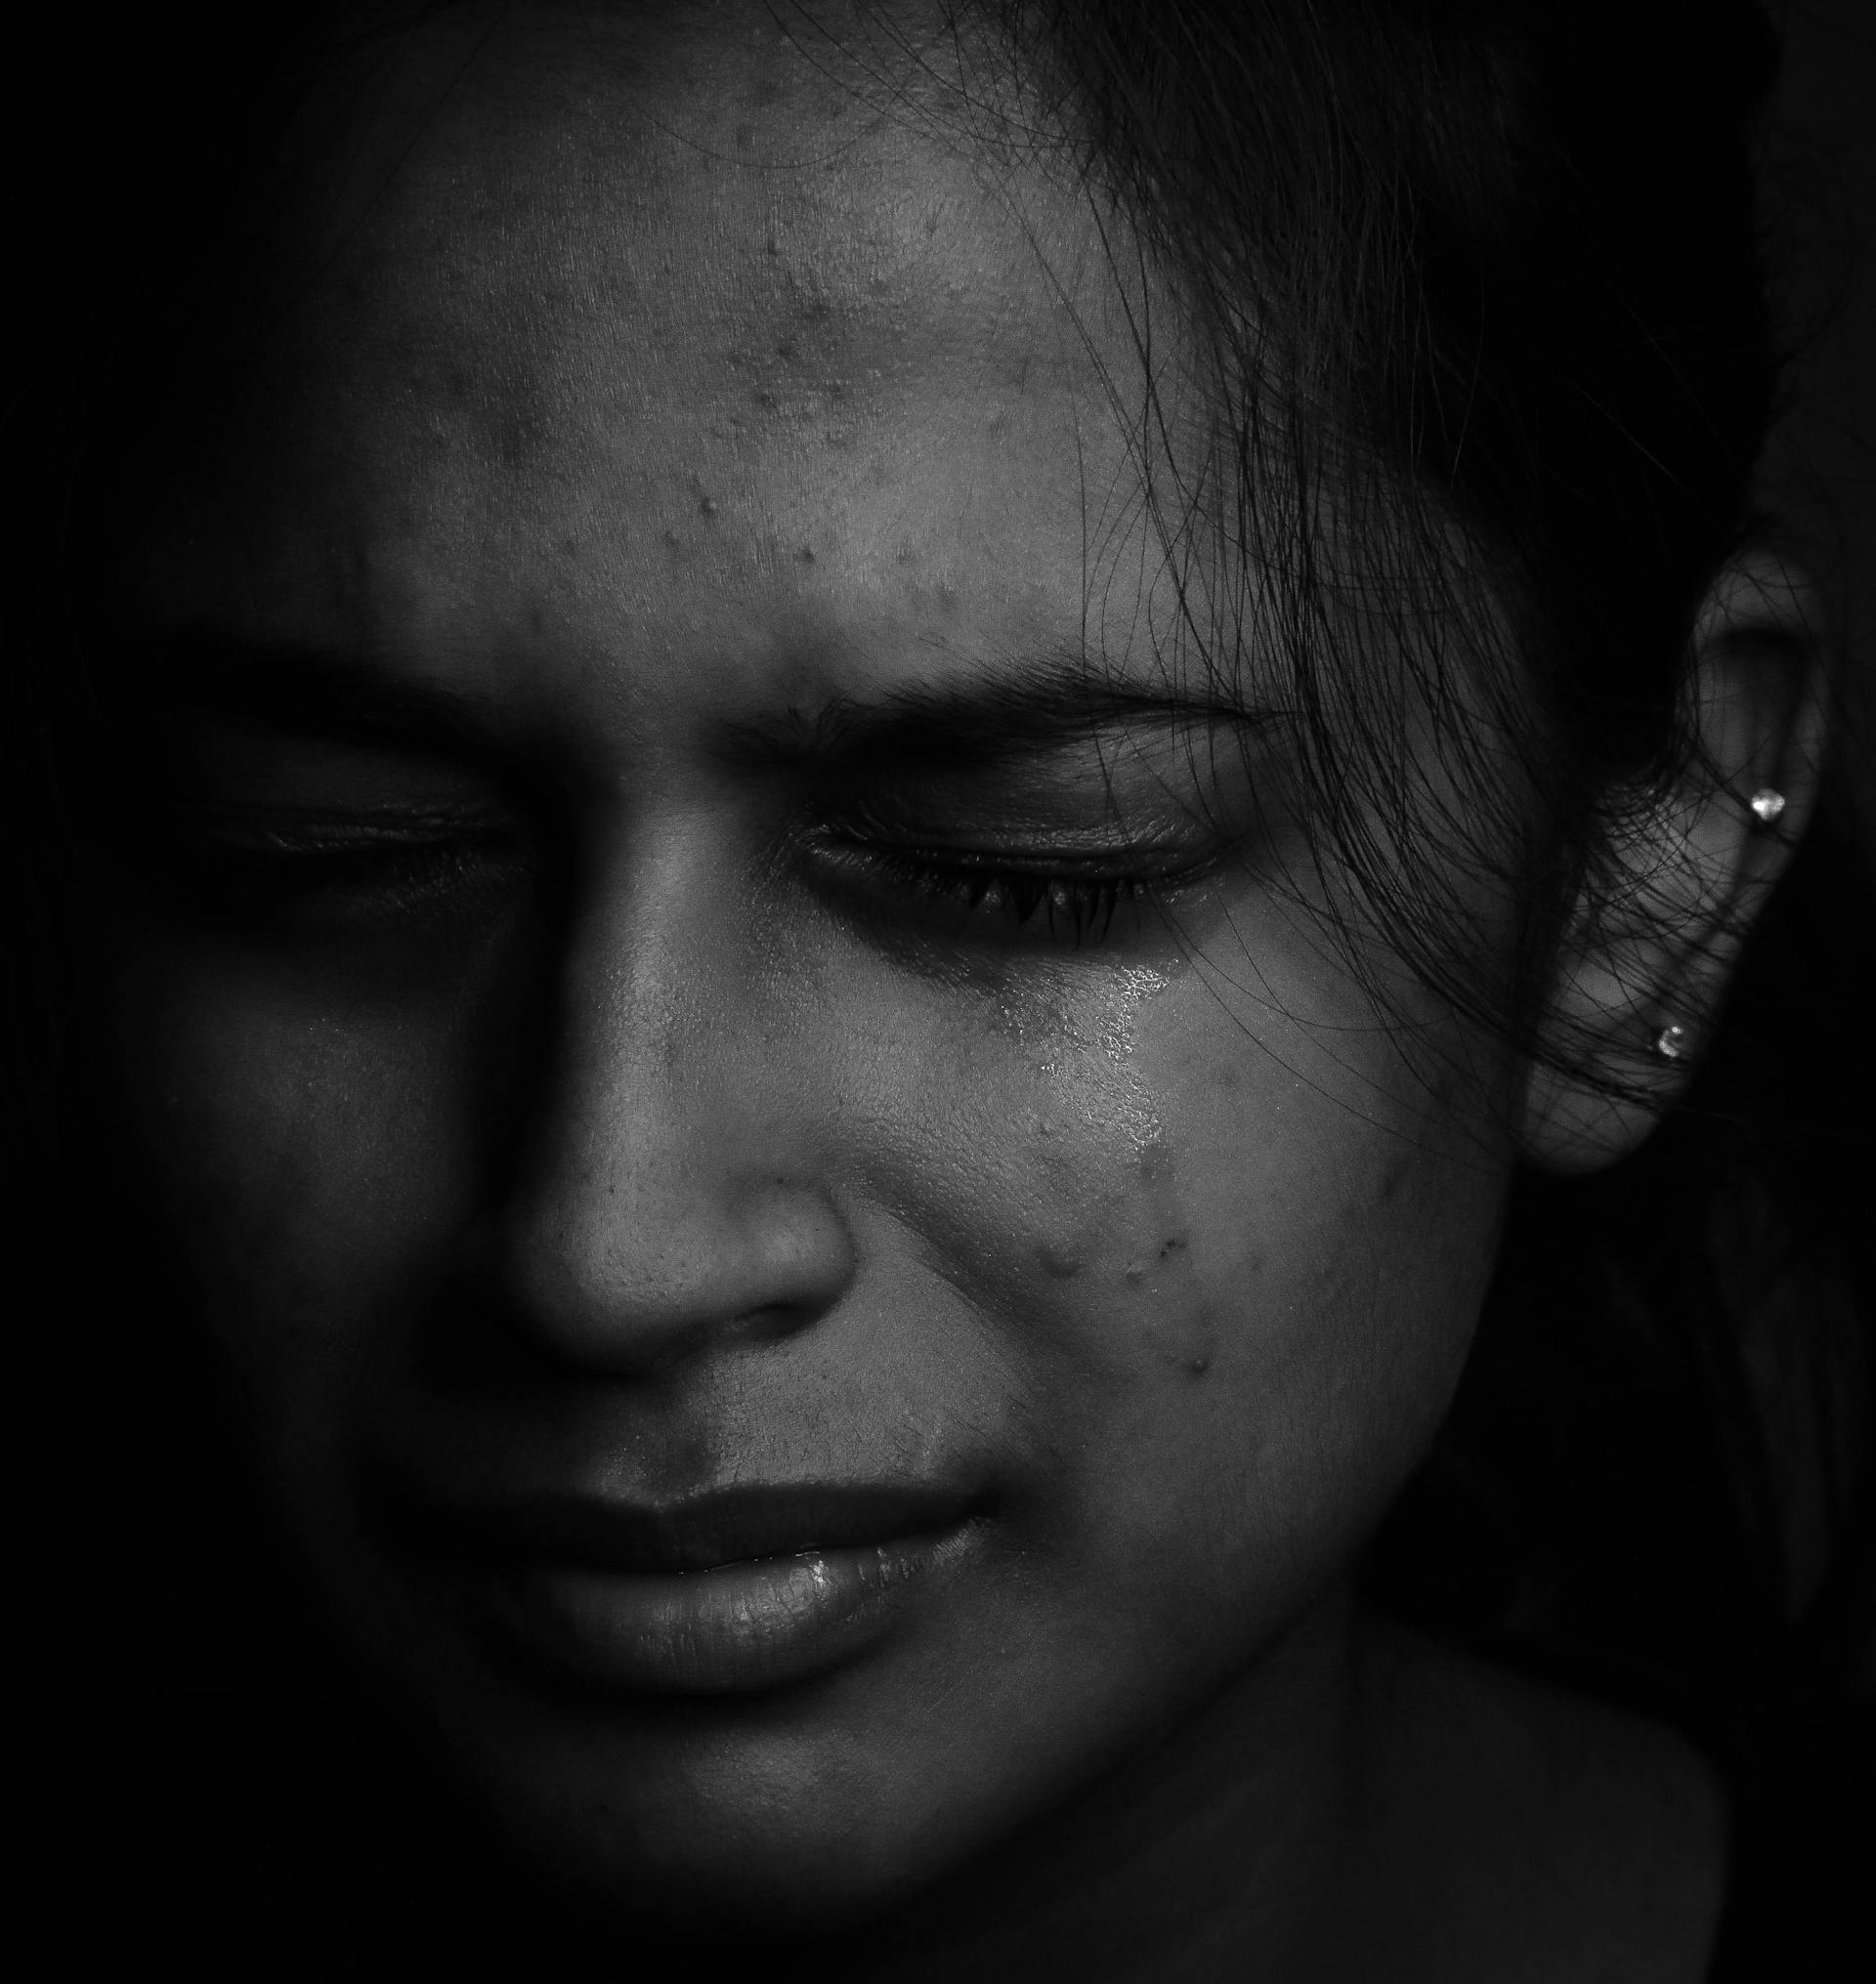 A woman crying | Source: Pexels